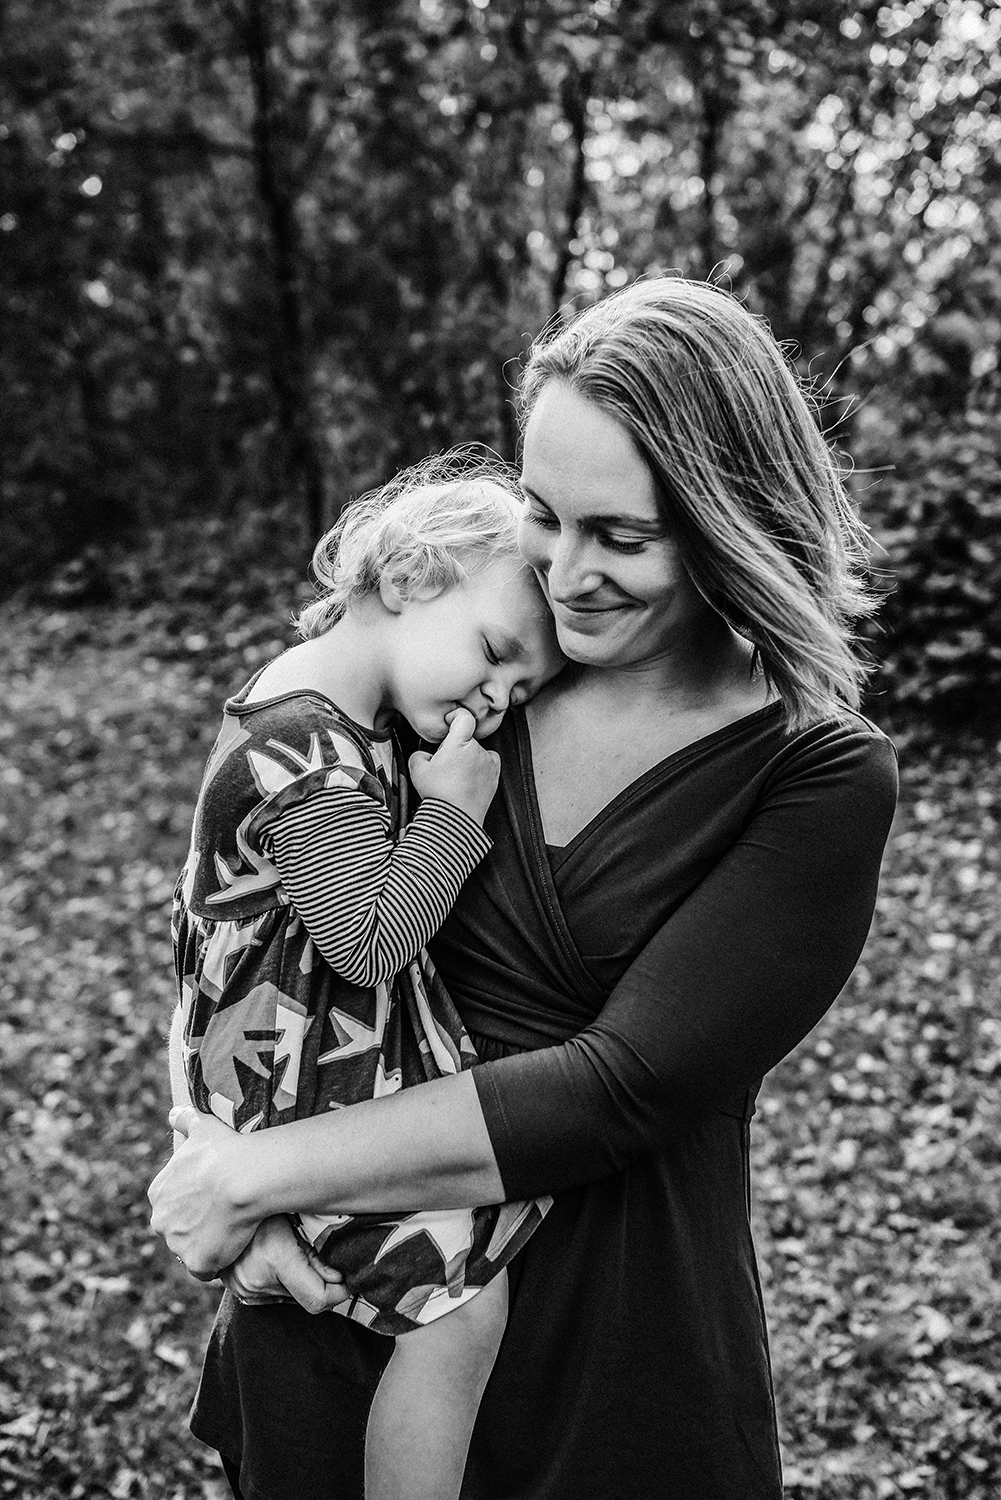 mom and daughter embracing in black and white.jpg